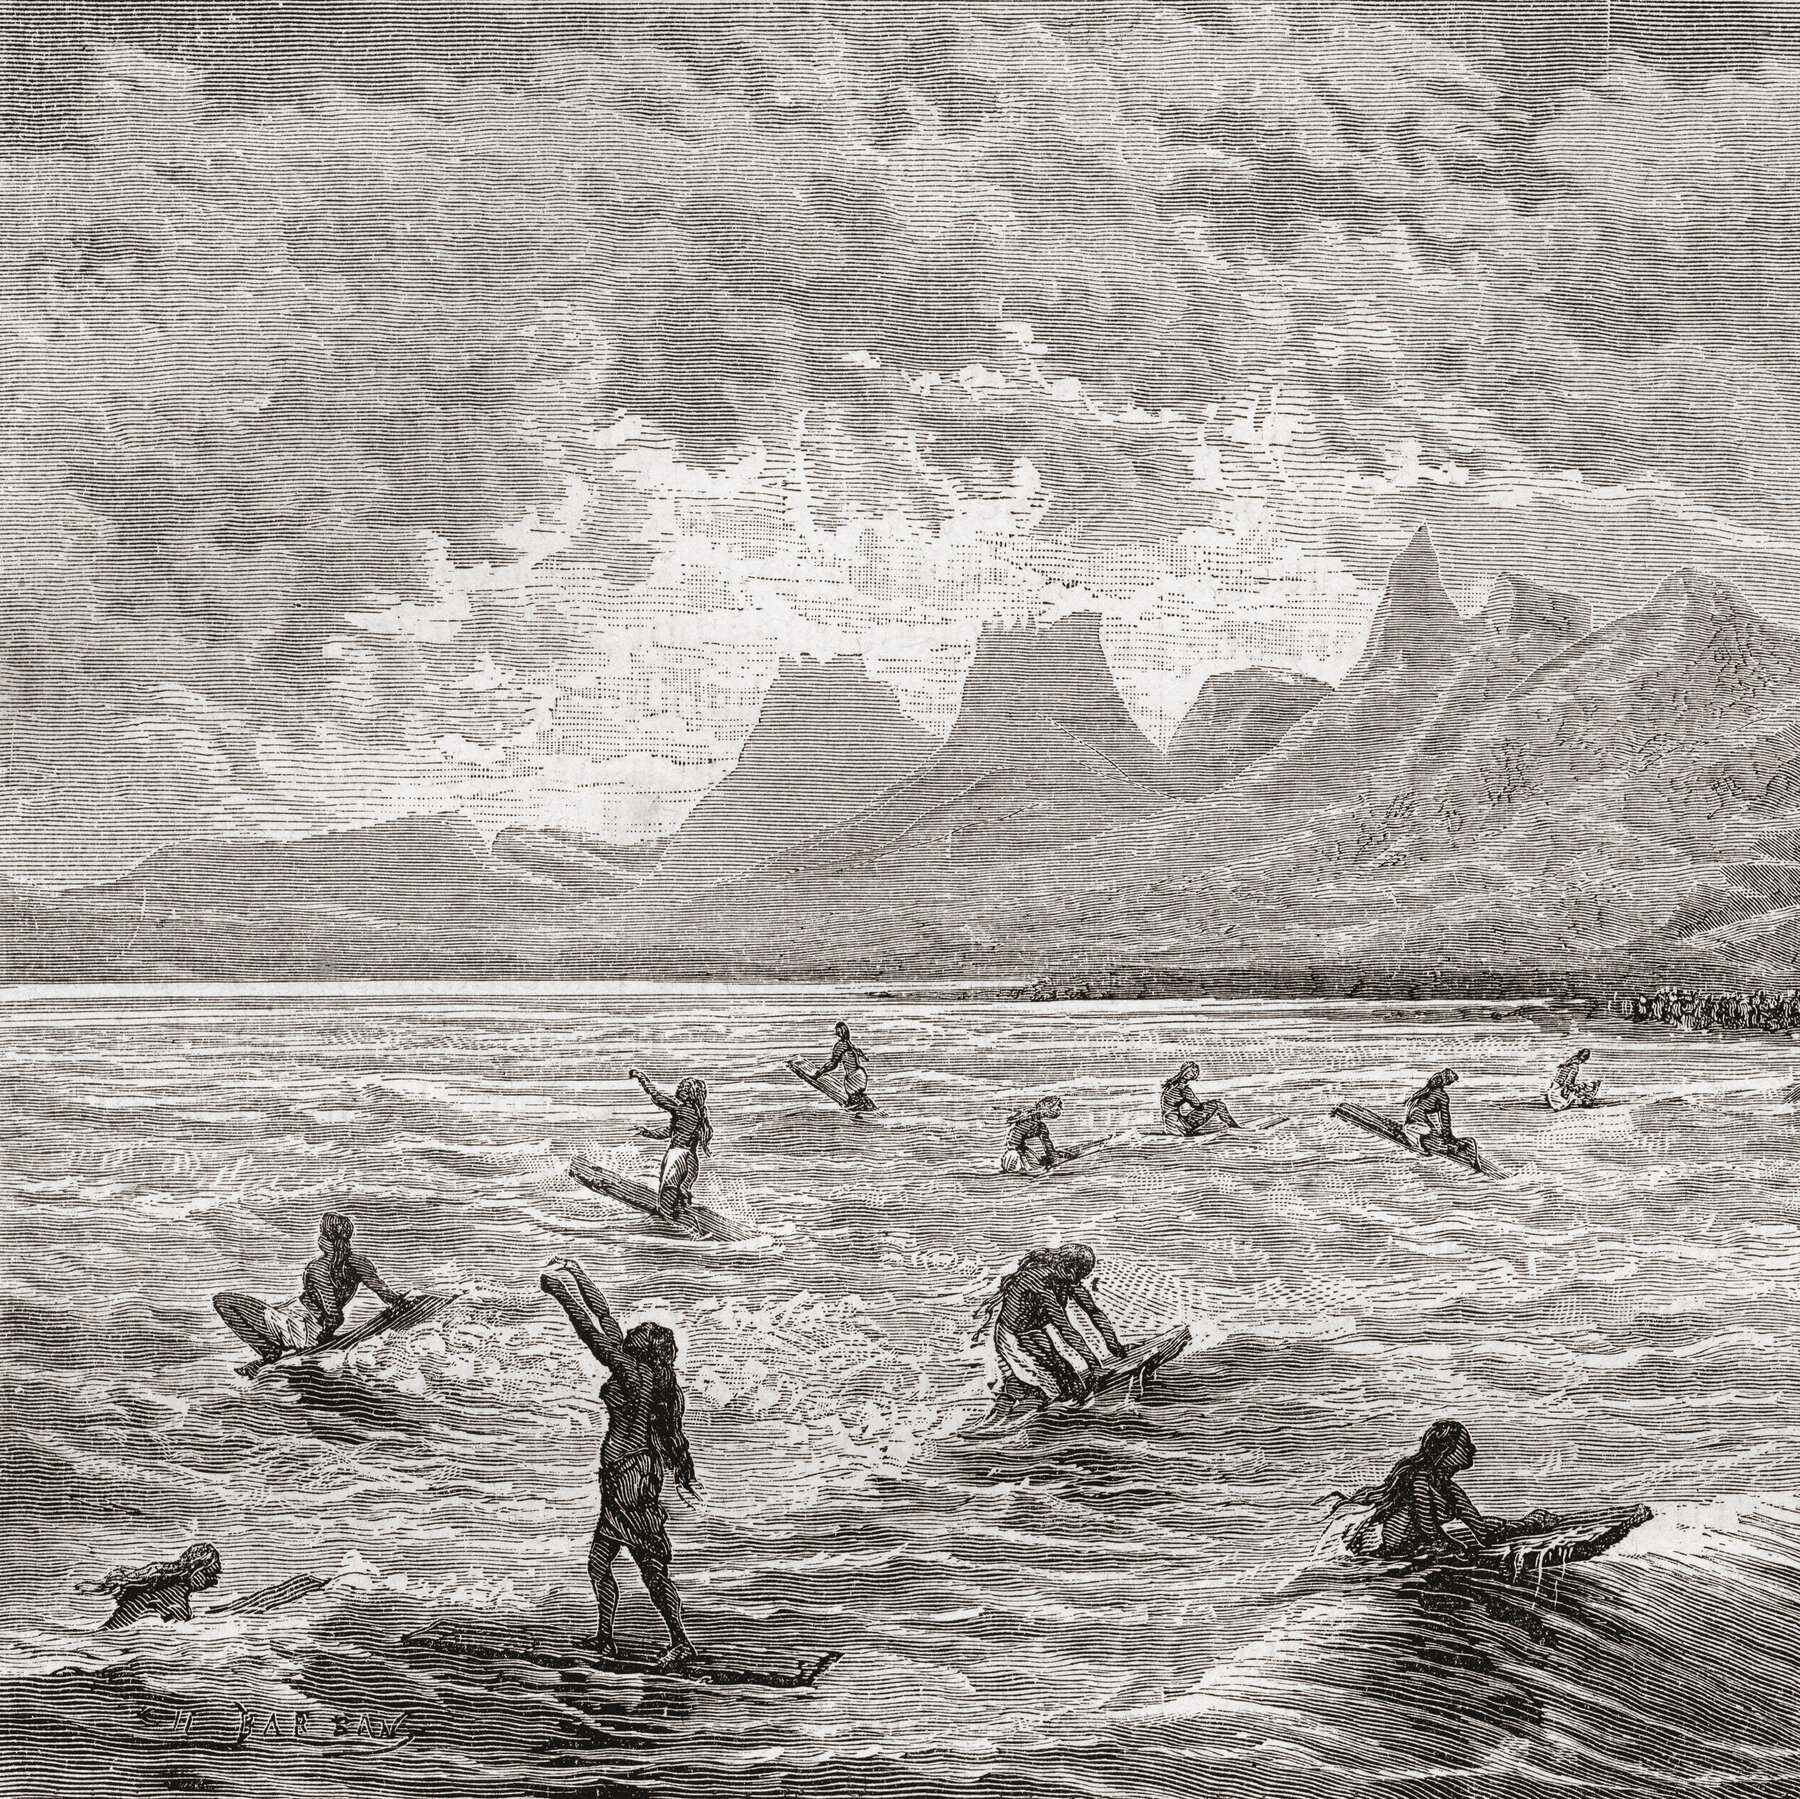 A History Of Surfing In Hawaii